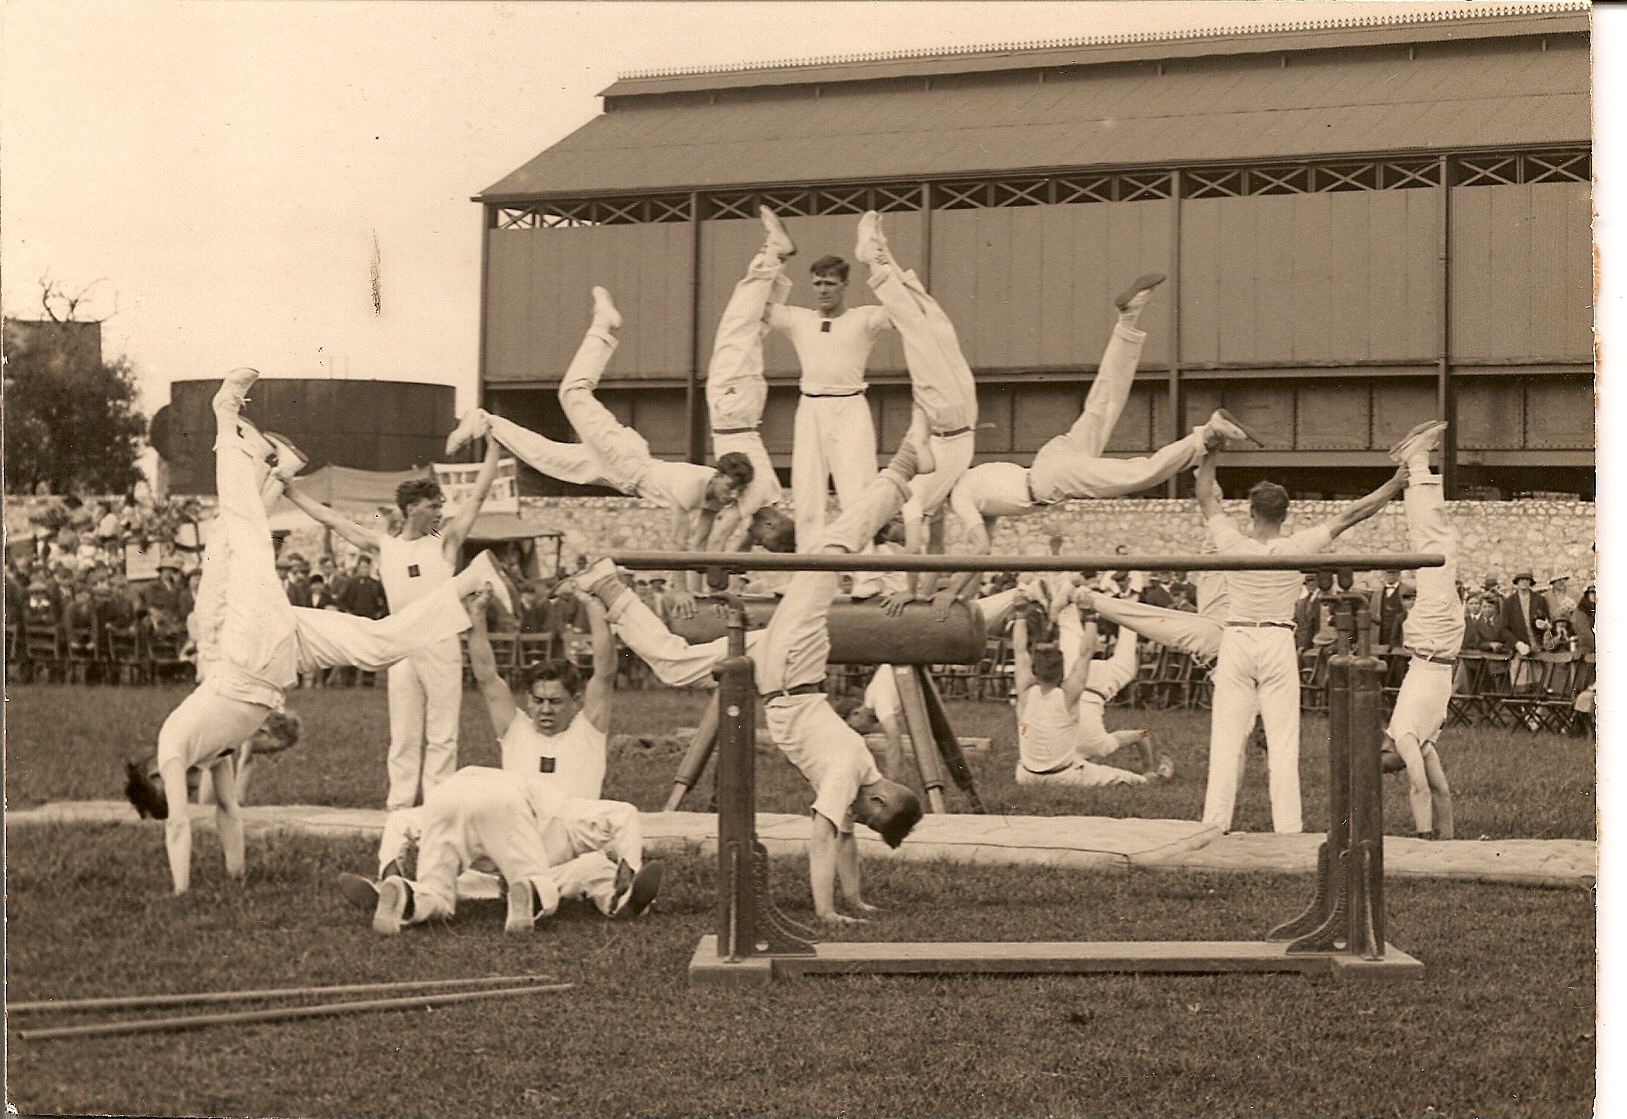 A group of men in white trousers and tops performing what looks like a gymnastics display.